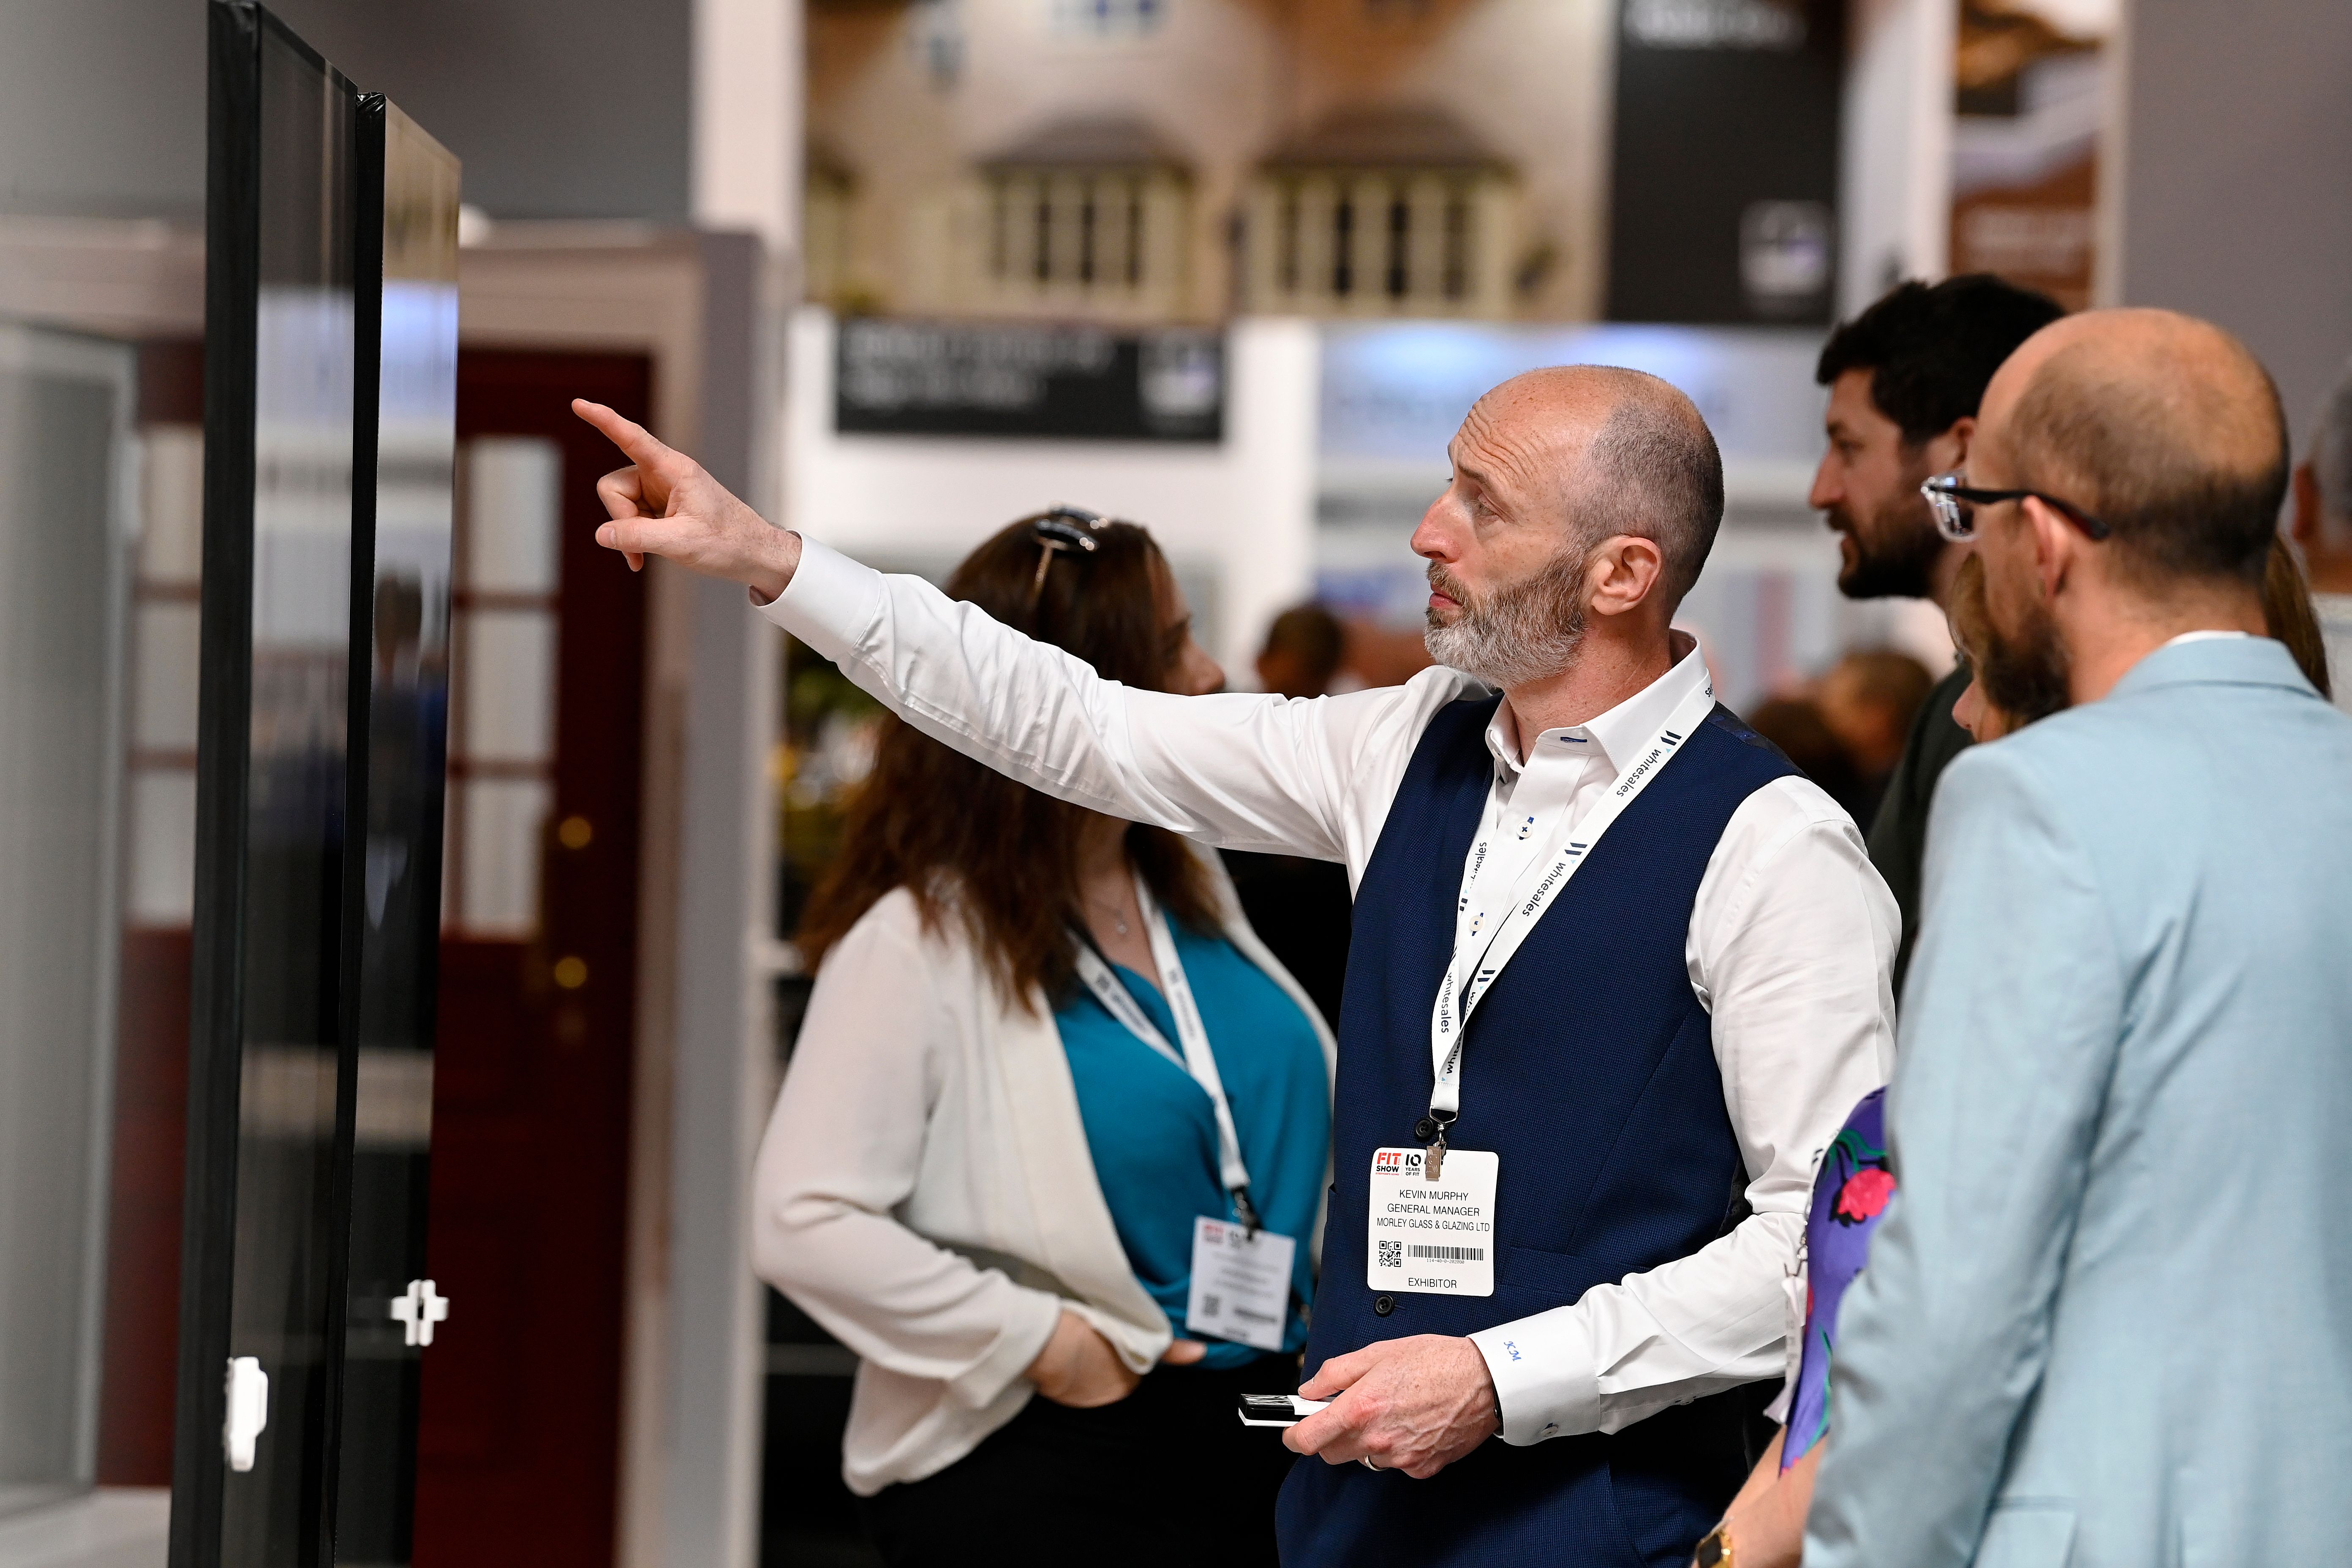 Testimonials - Don't just take our word for it! Find out what our exhibitors and visitors had to say